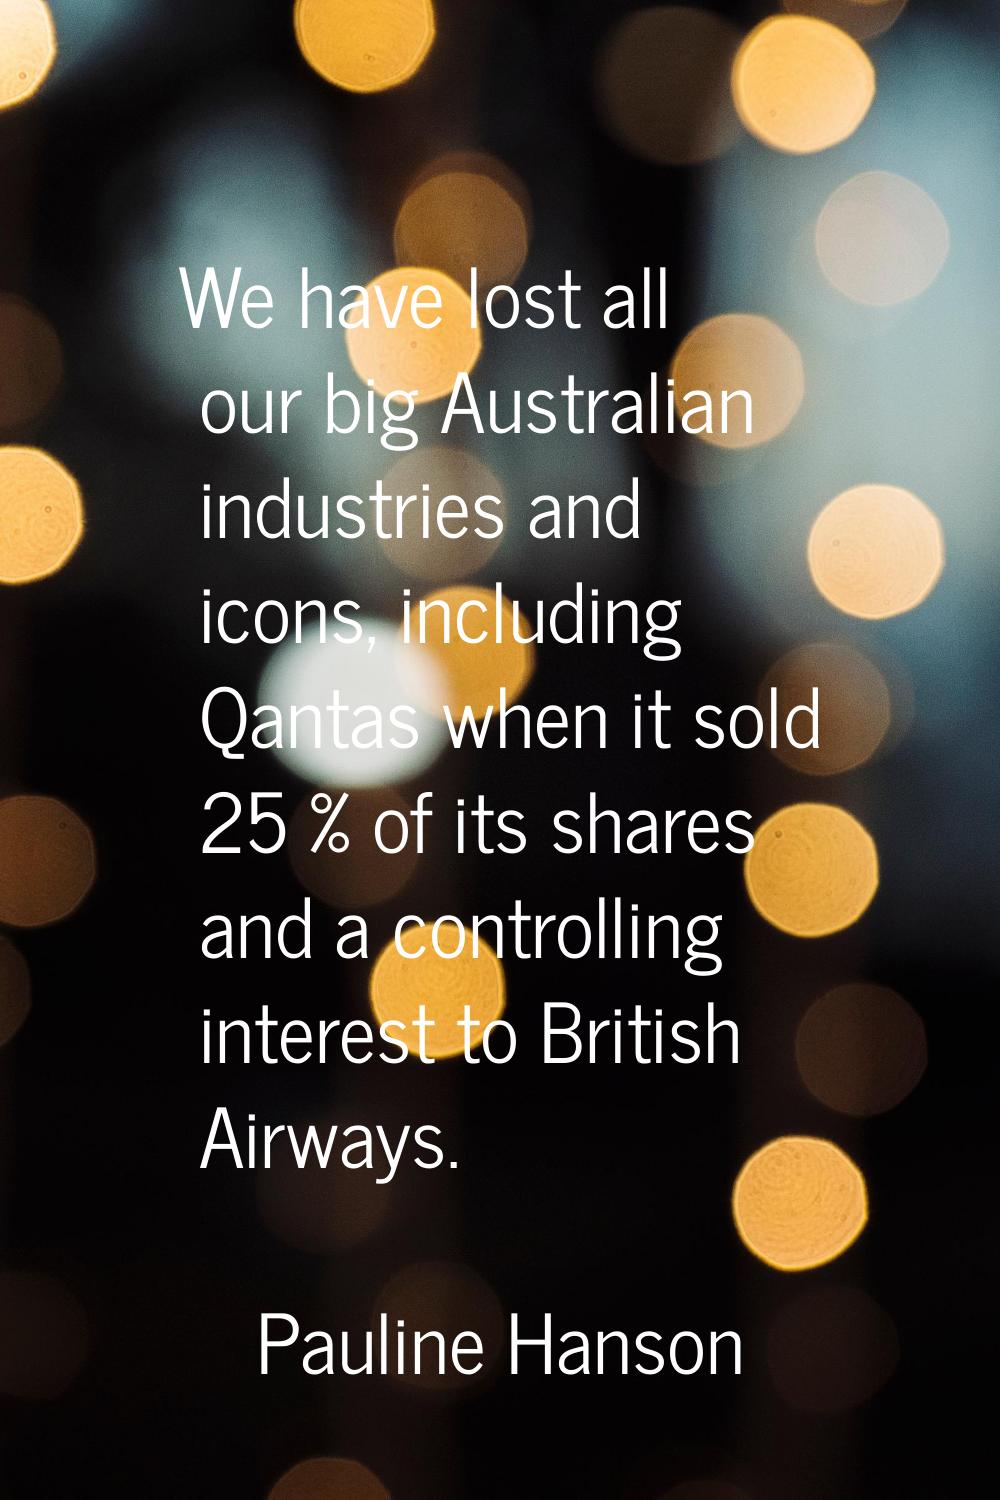 We have lost all our big Australian industries and icons, including Qantas when it sold 25 % of its